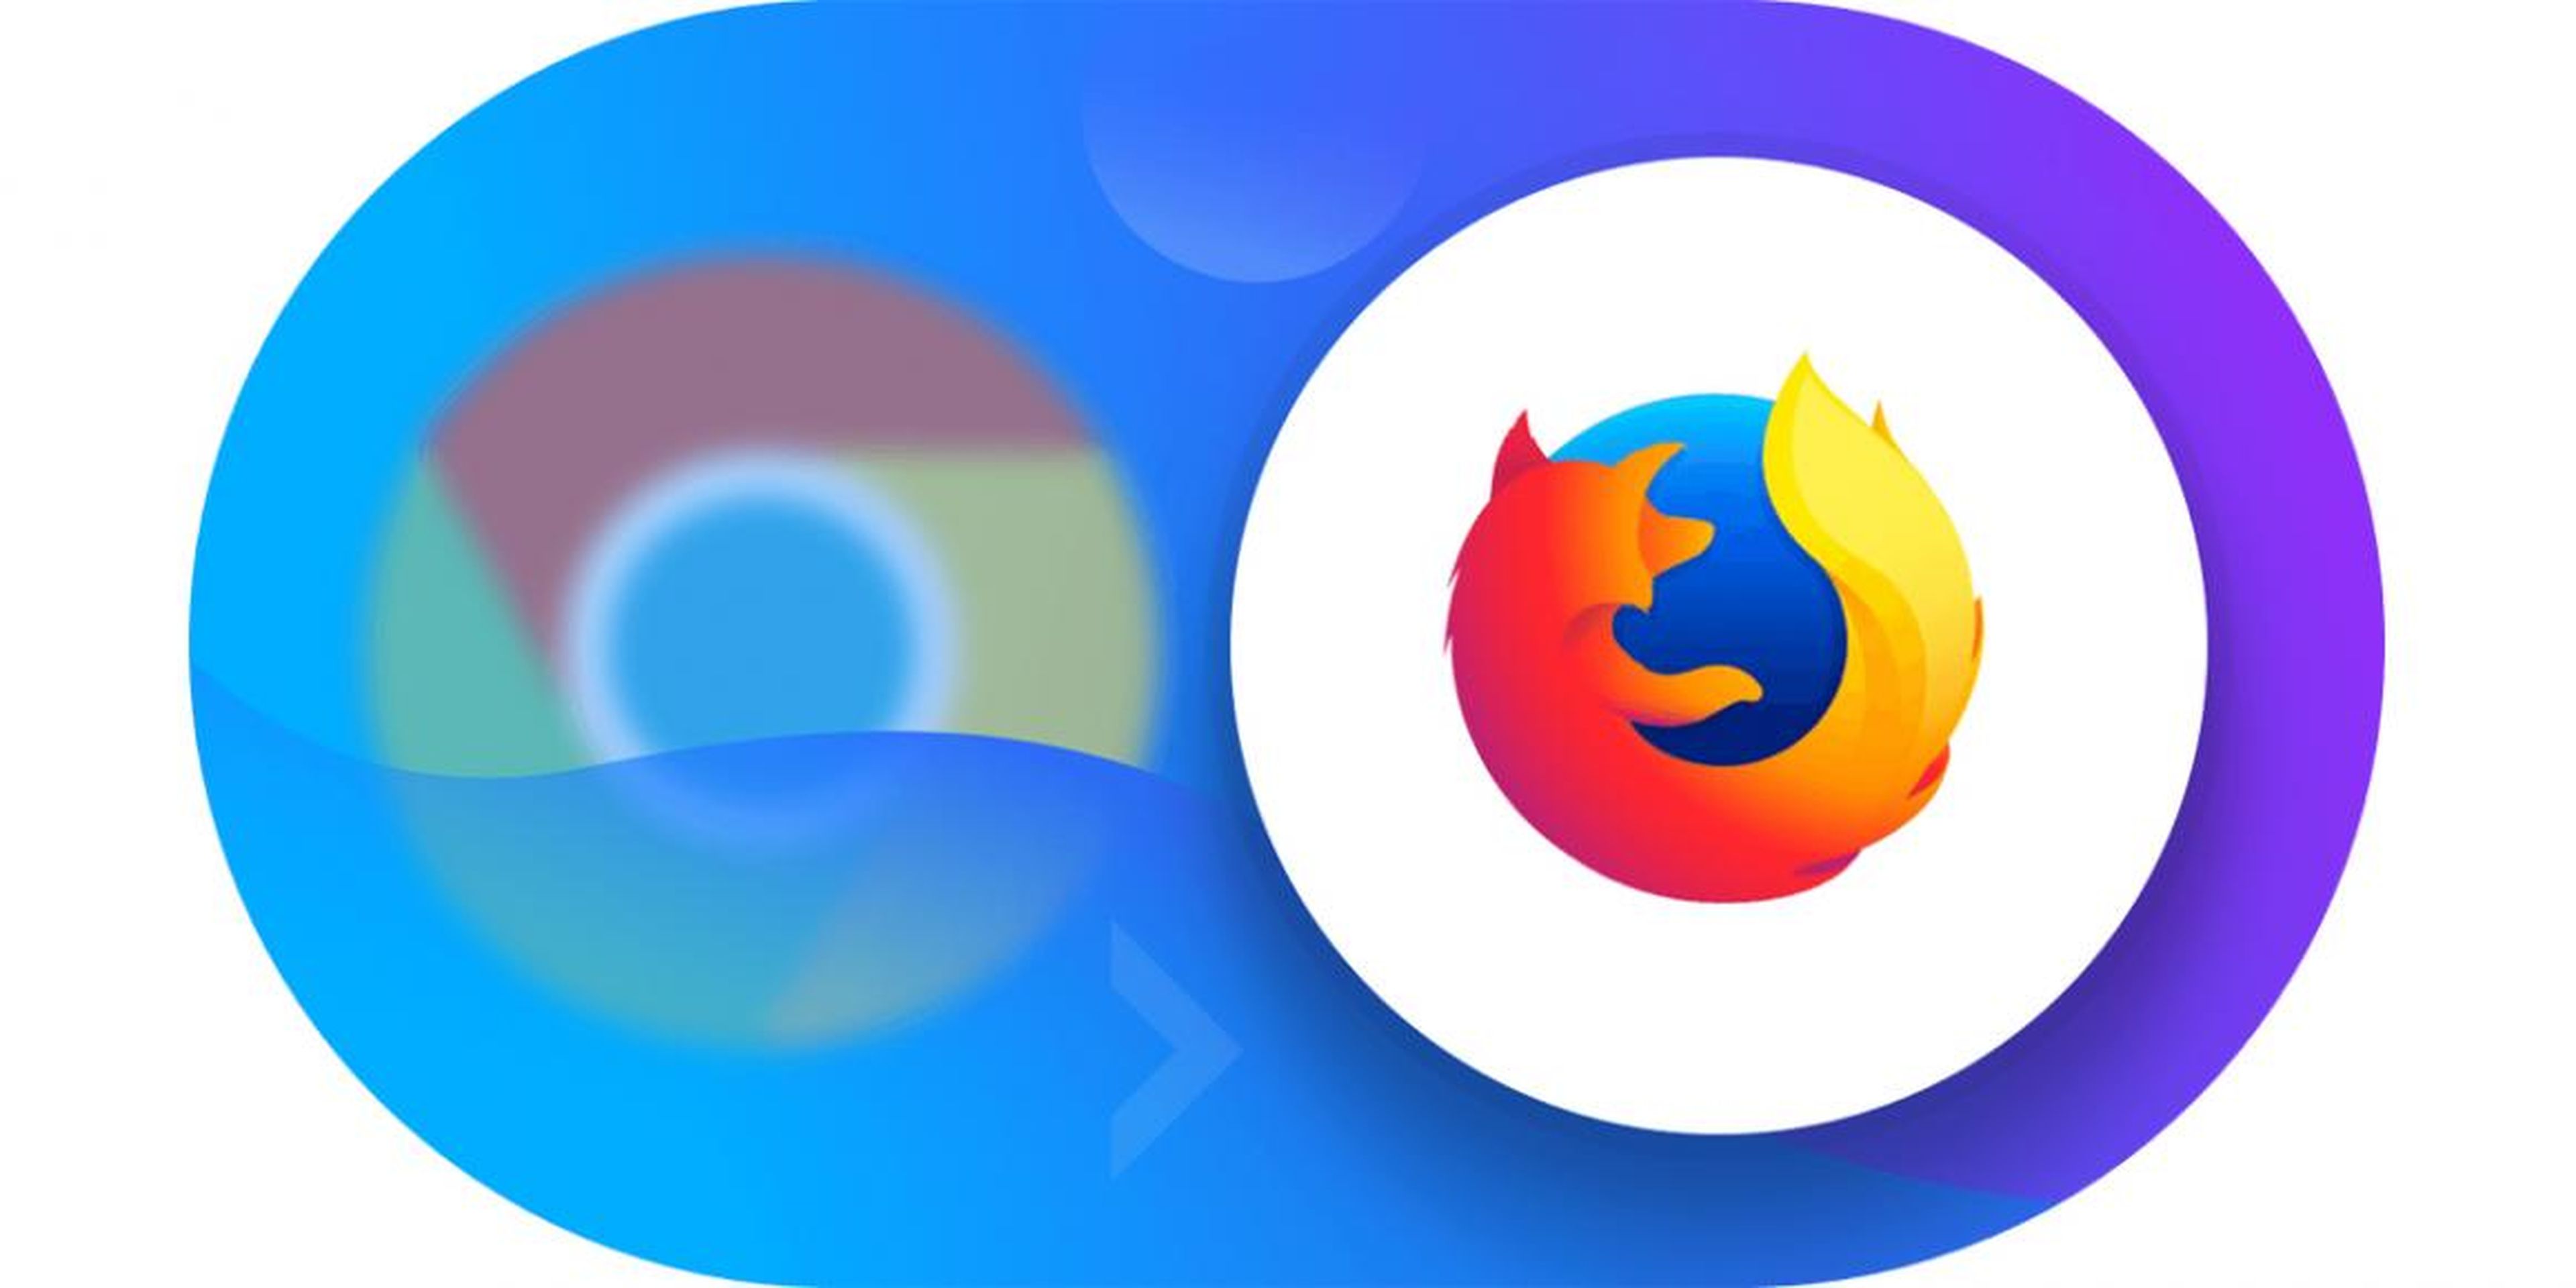 For web browsing, move from Google Chrome to Mozilla Firefox.